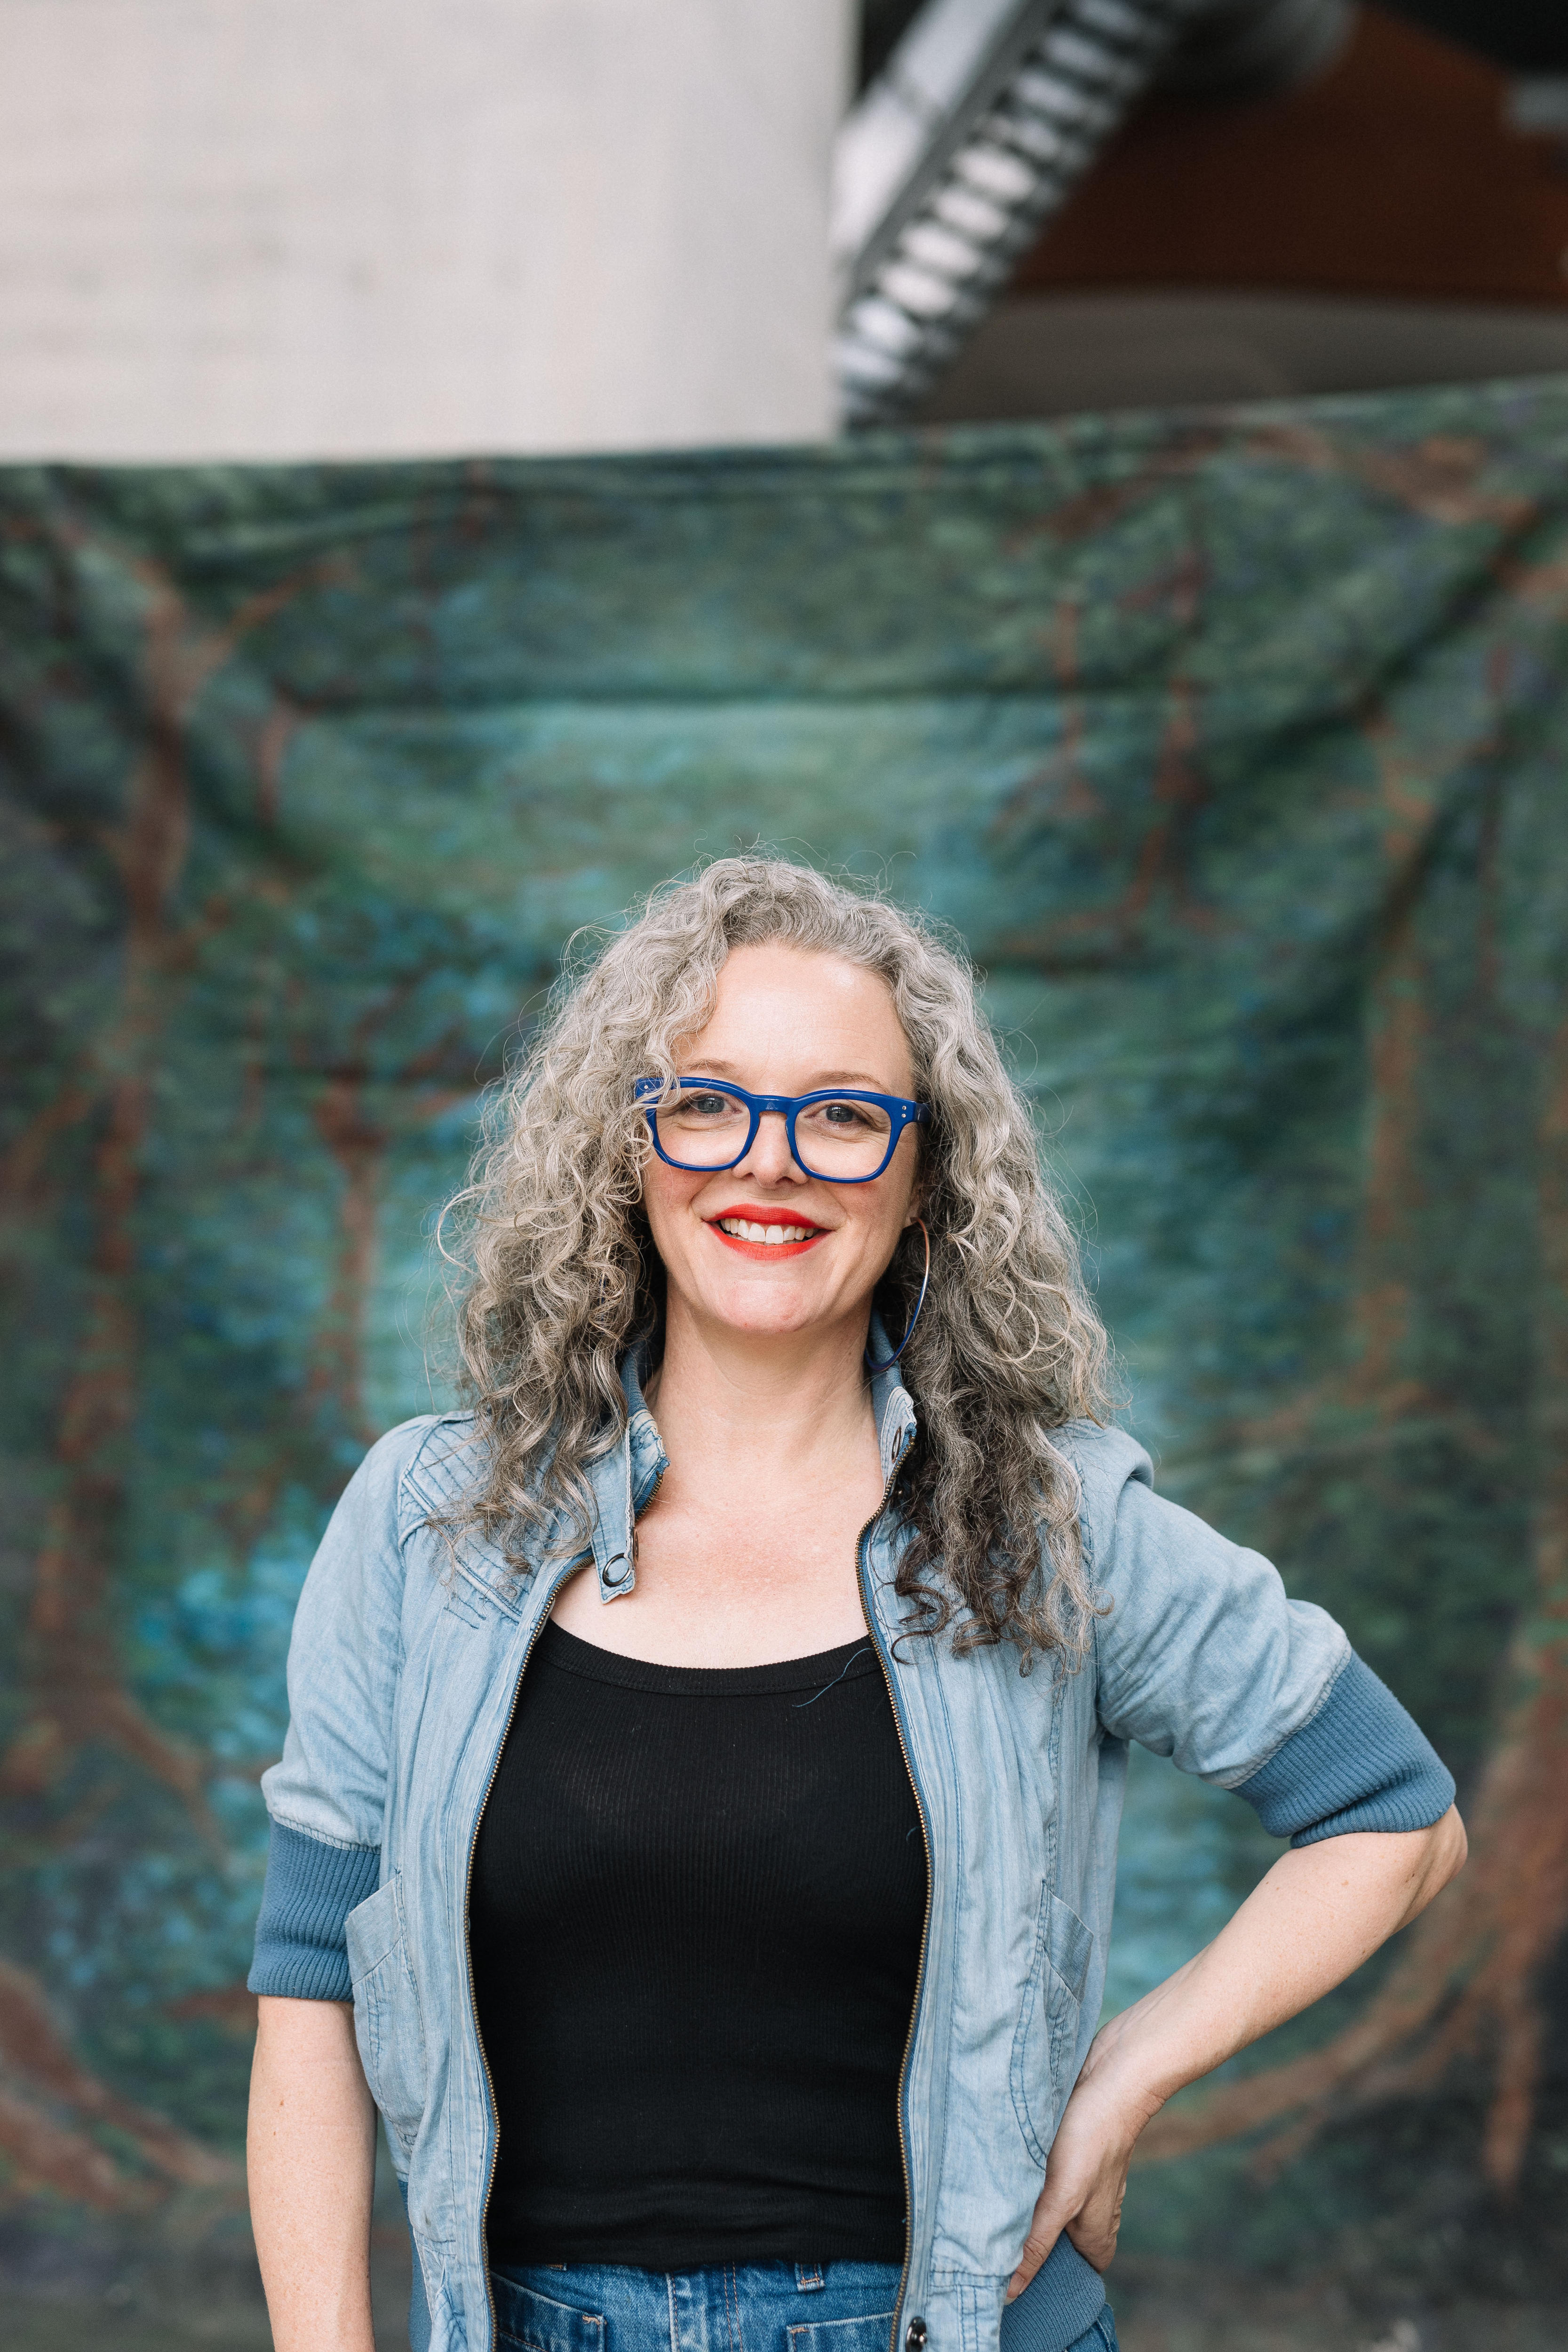 White woman with curly grey hair wears vibrant blue glasses, red lipstick and a denim jacket over a black shirt.